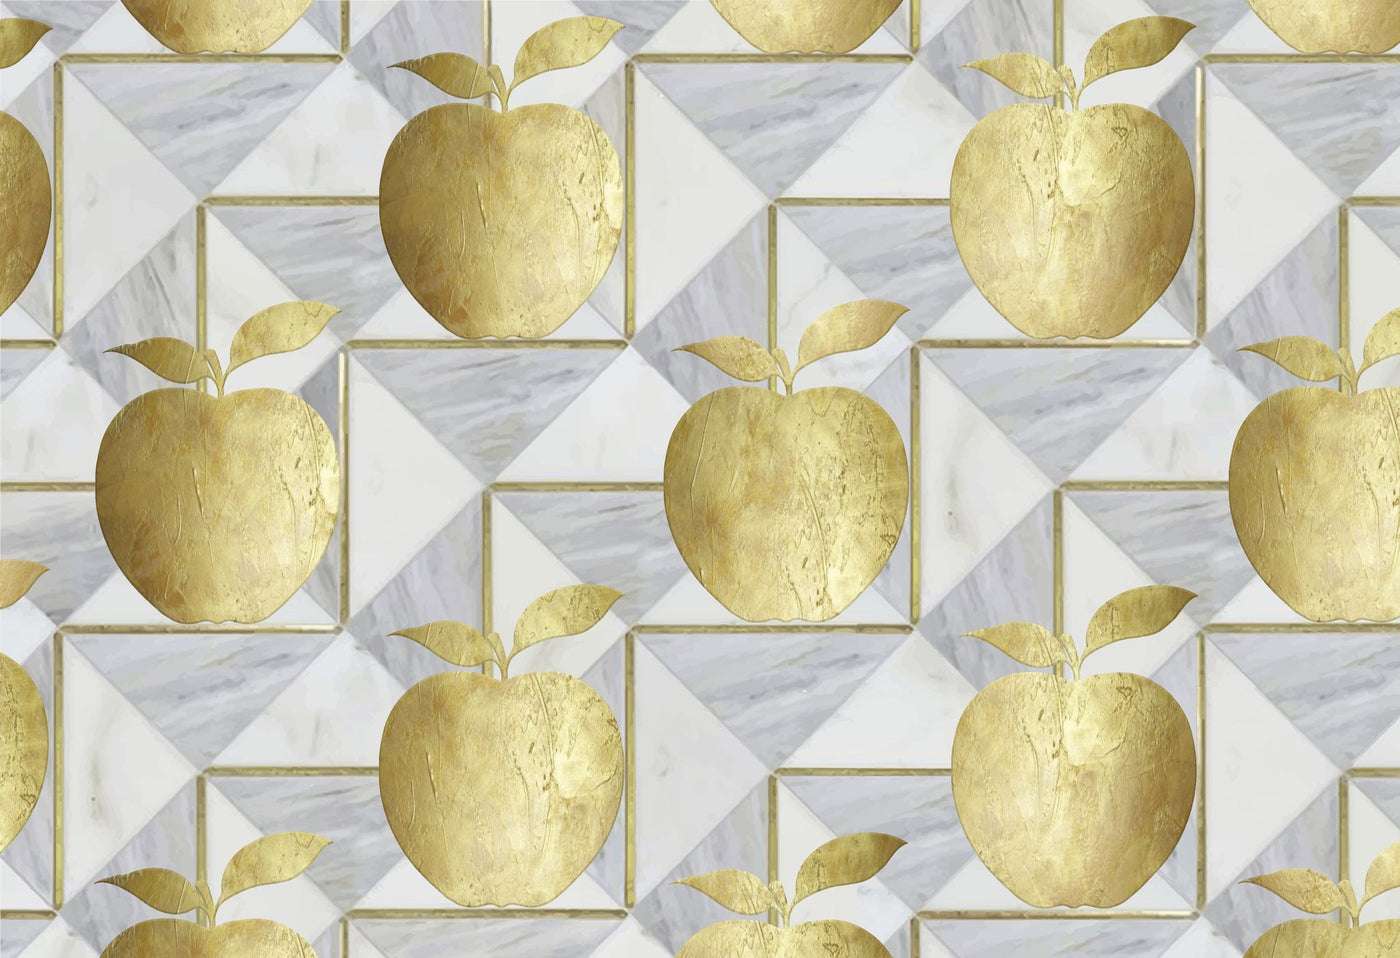 Golden Apple Paper Chargers - 24 per Package - Set With Style